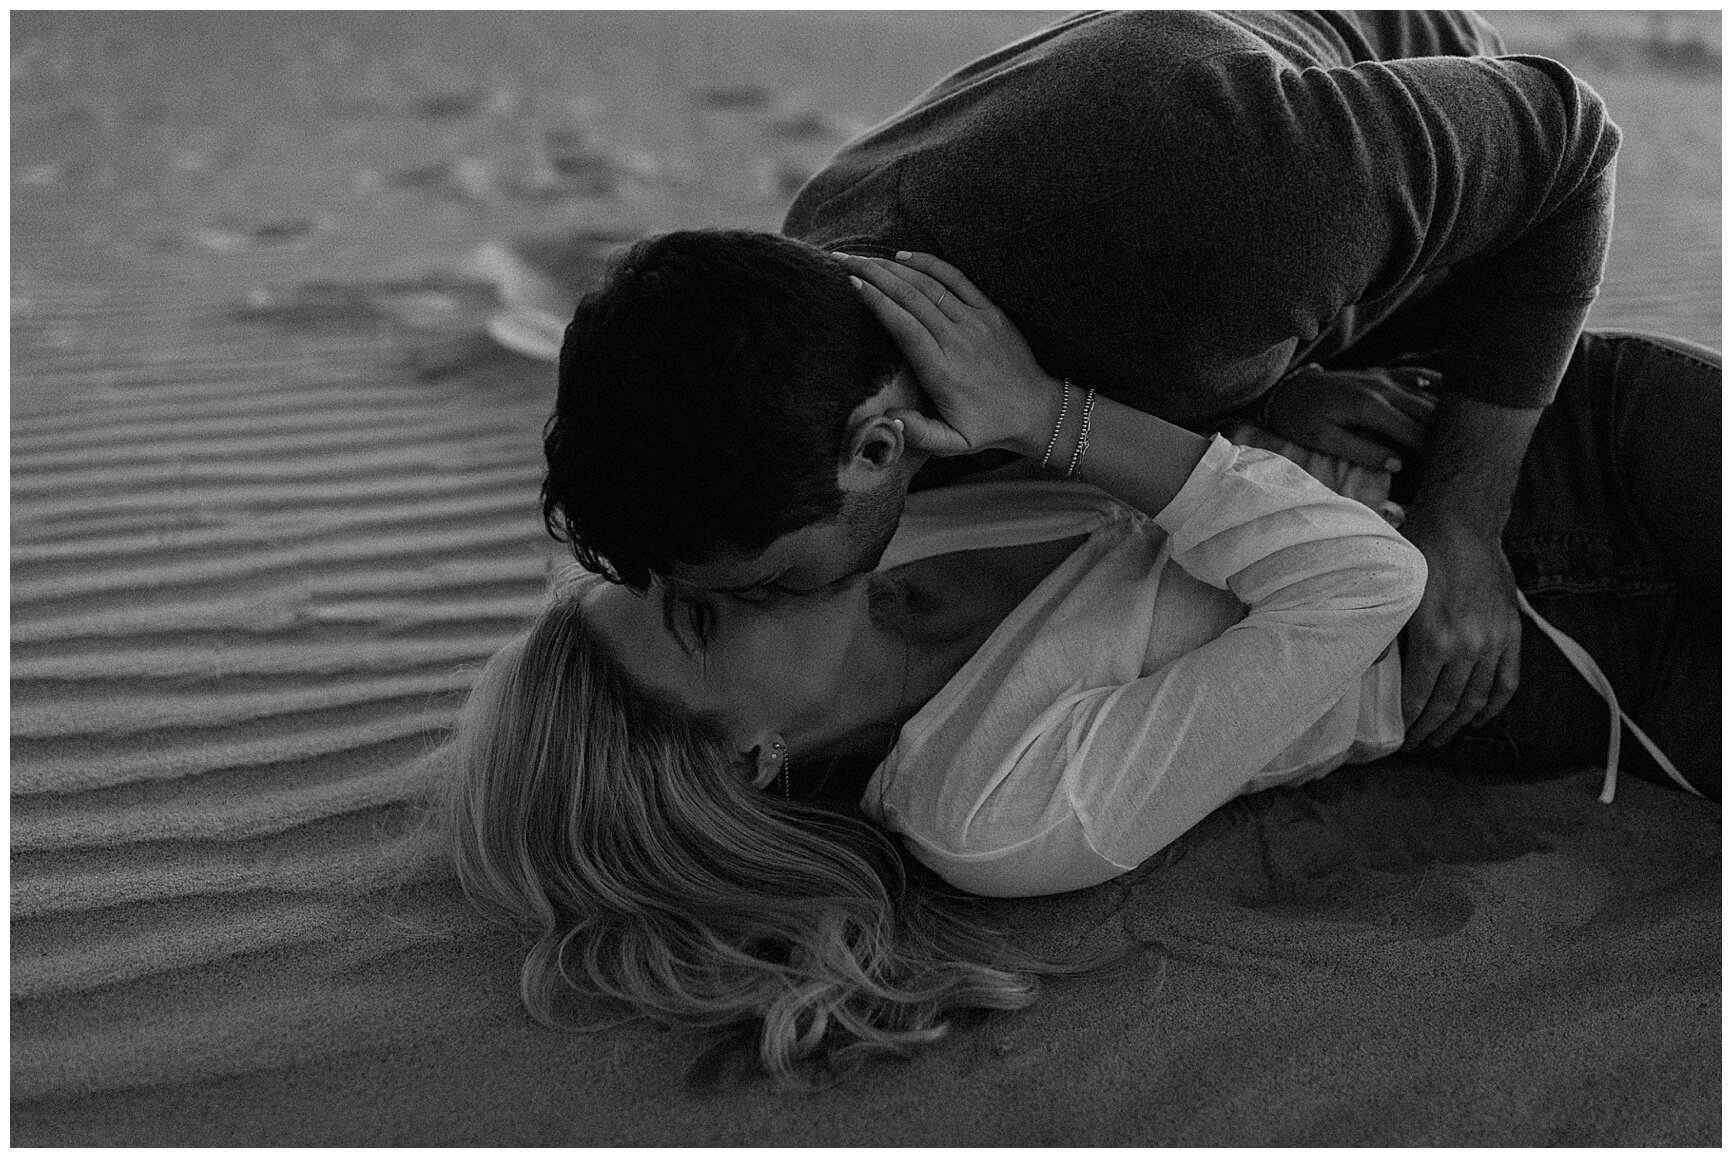  engaged couple popping champagne in the sand during their sand dune engagement session 